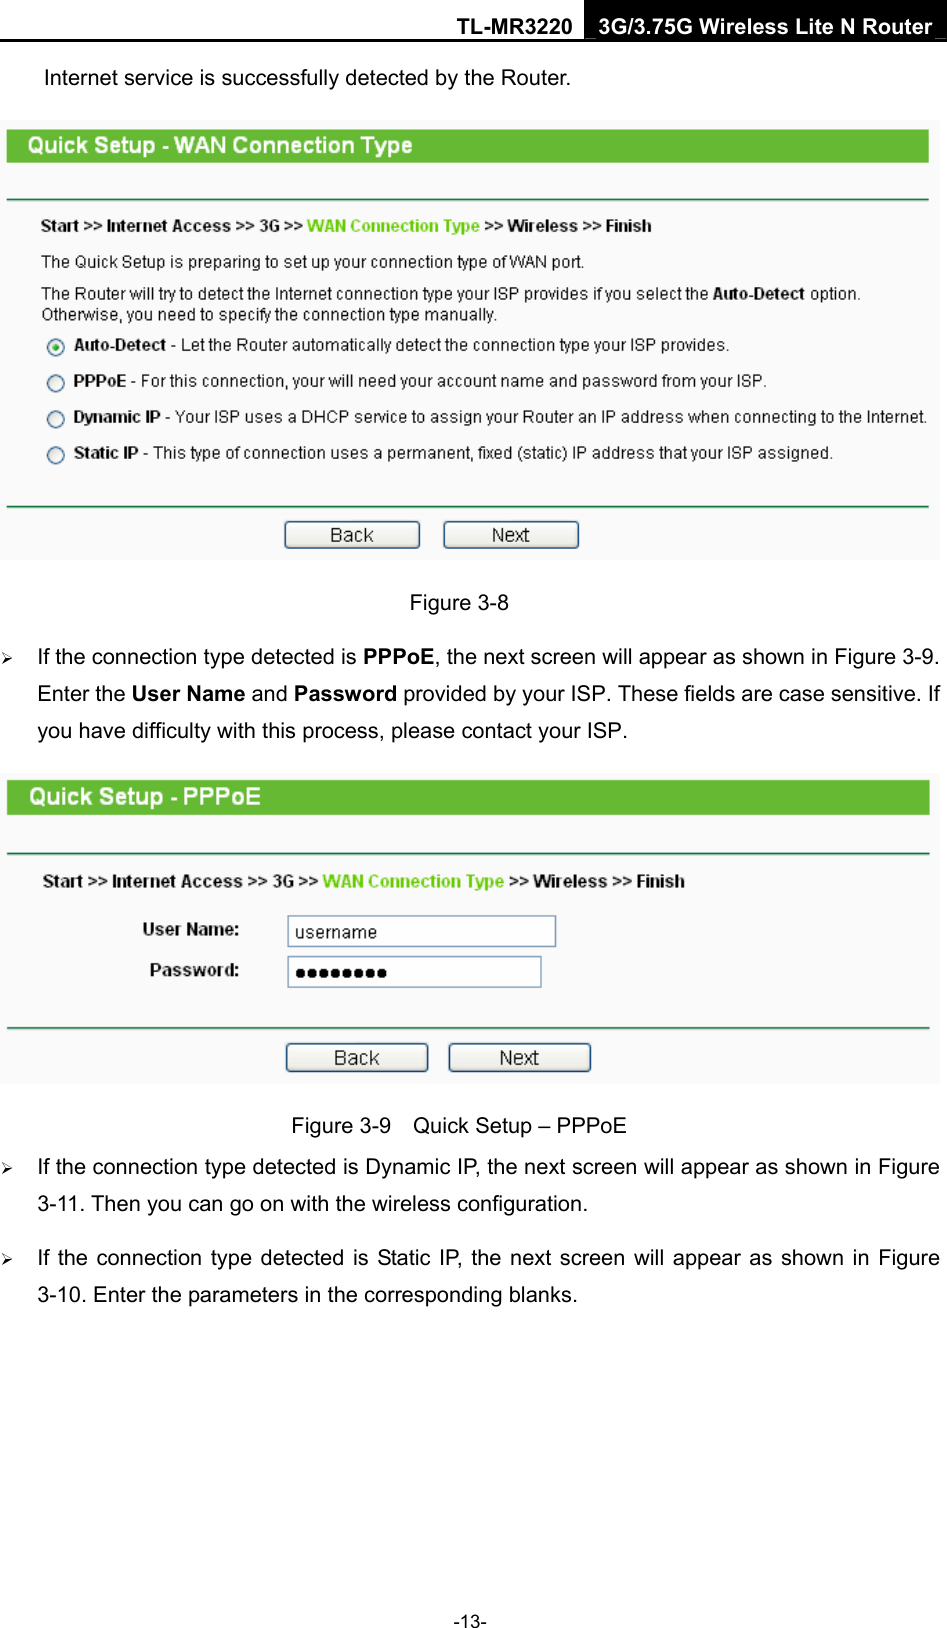 TL-MR3220 3G/3.75G Wireless Lite N Router -13- Internet service is successfully detected by the Router.  Figure 3-8 ¾ If the connection type detected is PPPoE, the next screen will appear as shown in Figure 3-9. Enter the User Name and Password provided by your ISP. These fields are case sensitive. If you have difficulty with this process, please contact your ISP.  Figure 3-9    Quick Setup – PPPoE ¾ If the connection type detected is Dynamic IP, the next screen will appear as shown in Figure 3-11. Then you can go on with the wireless configuration. ¾ If the connection type detected is Static IP, the next screen will appear as shown in Figure 3-10. Enter the parameters in the corresponding blanks. 